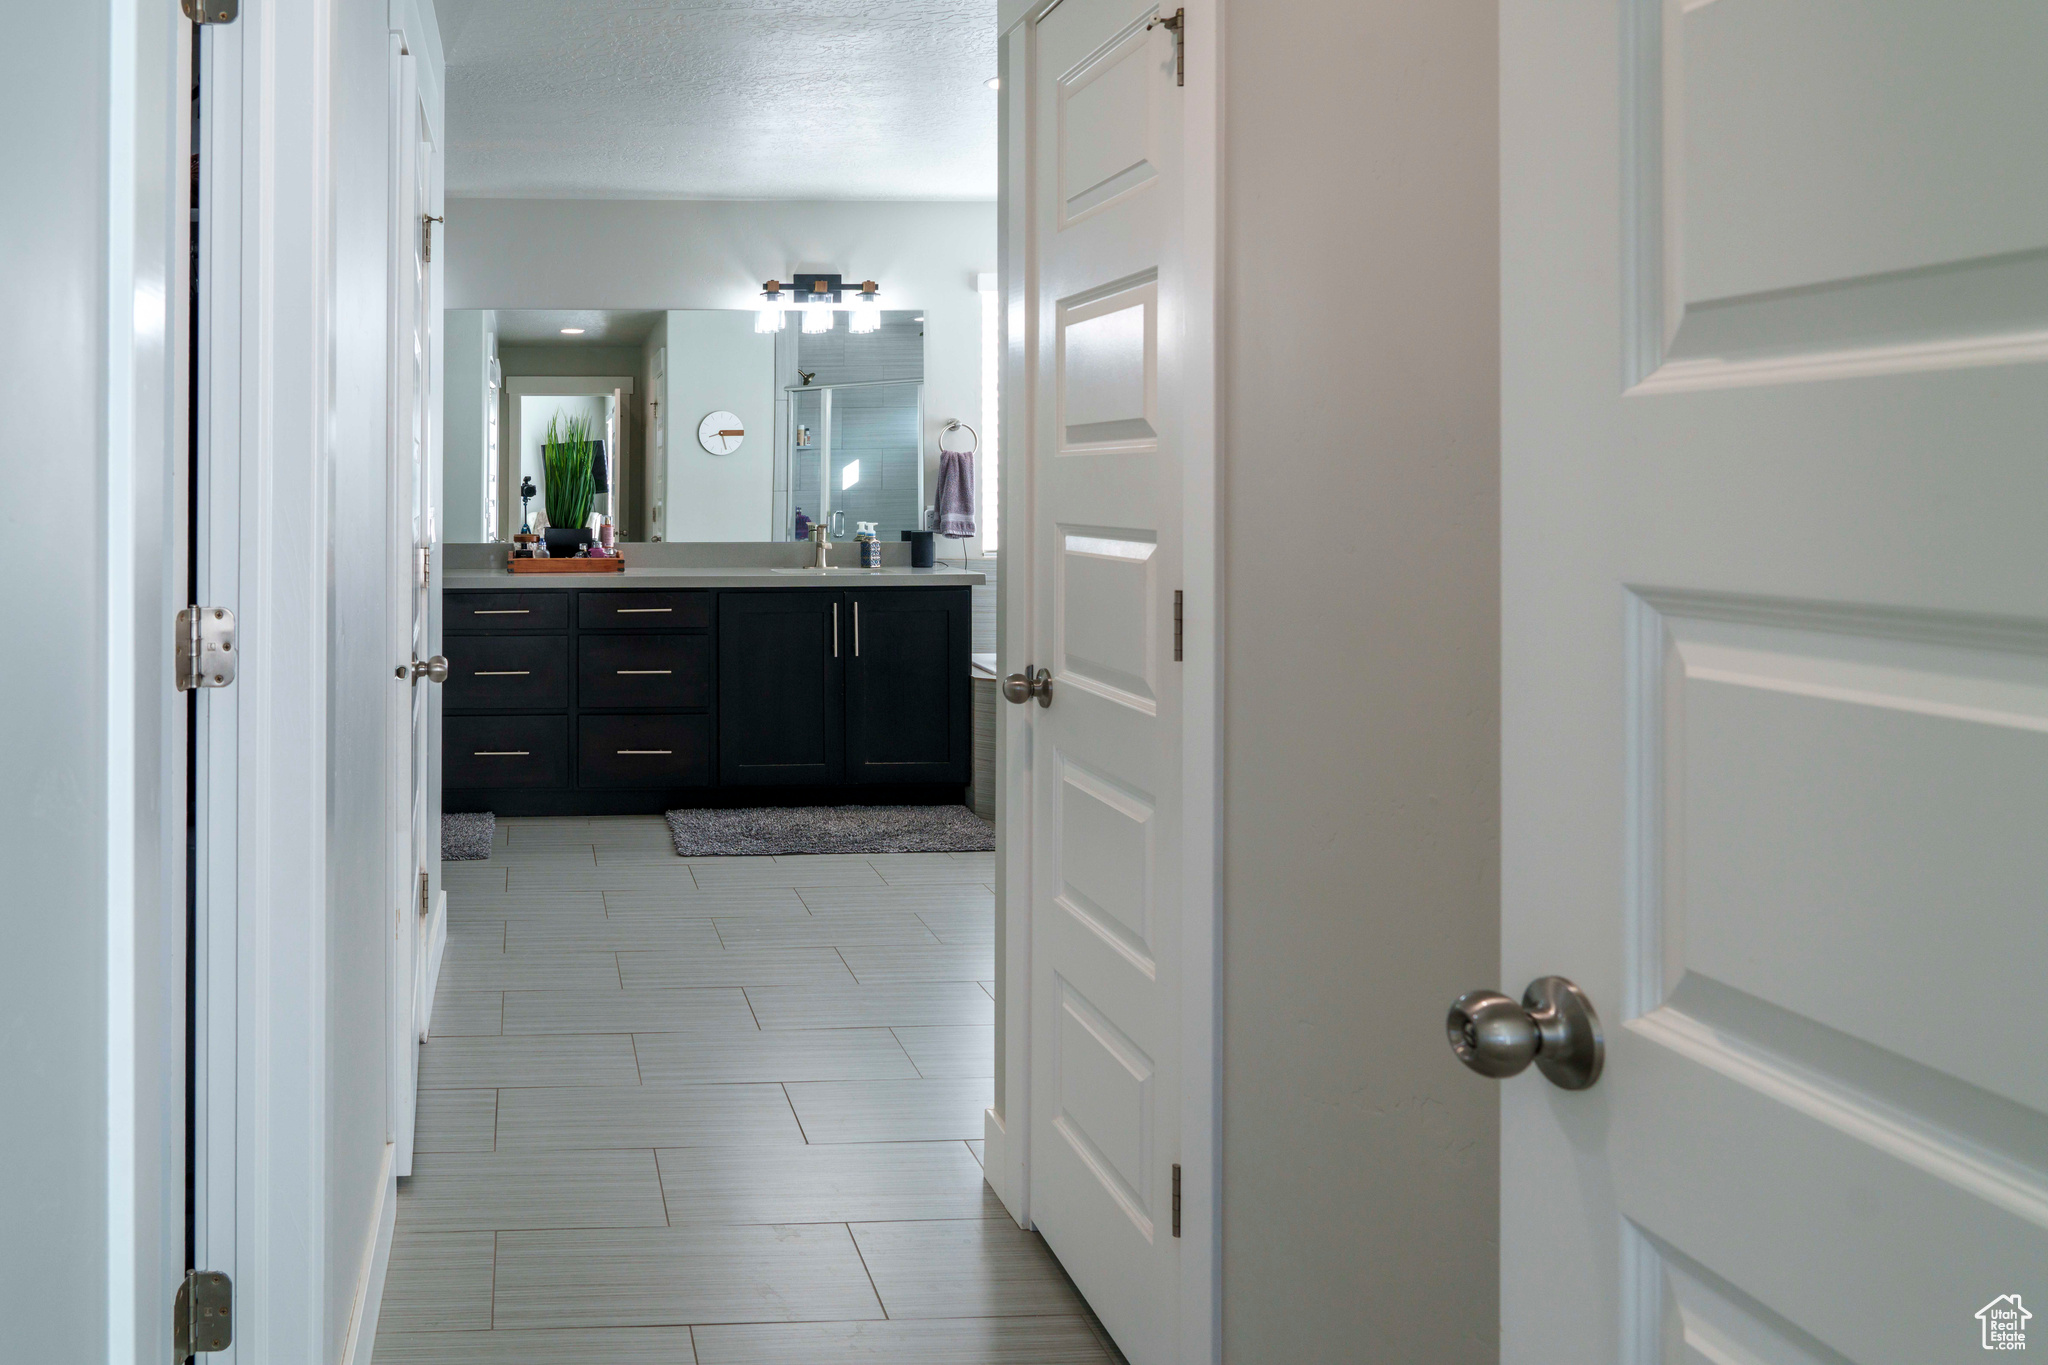 Hallway access from master bedroom to walk-in closet, master bathroom and linen closet.